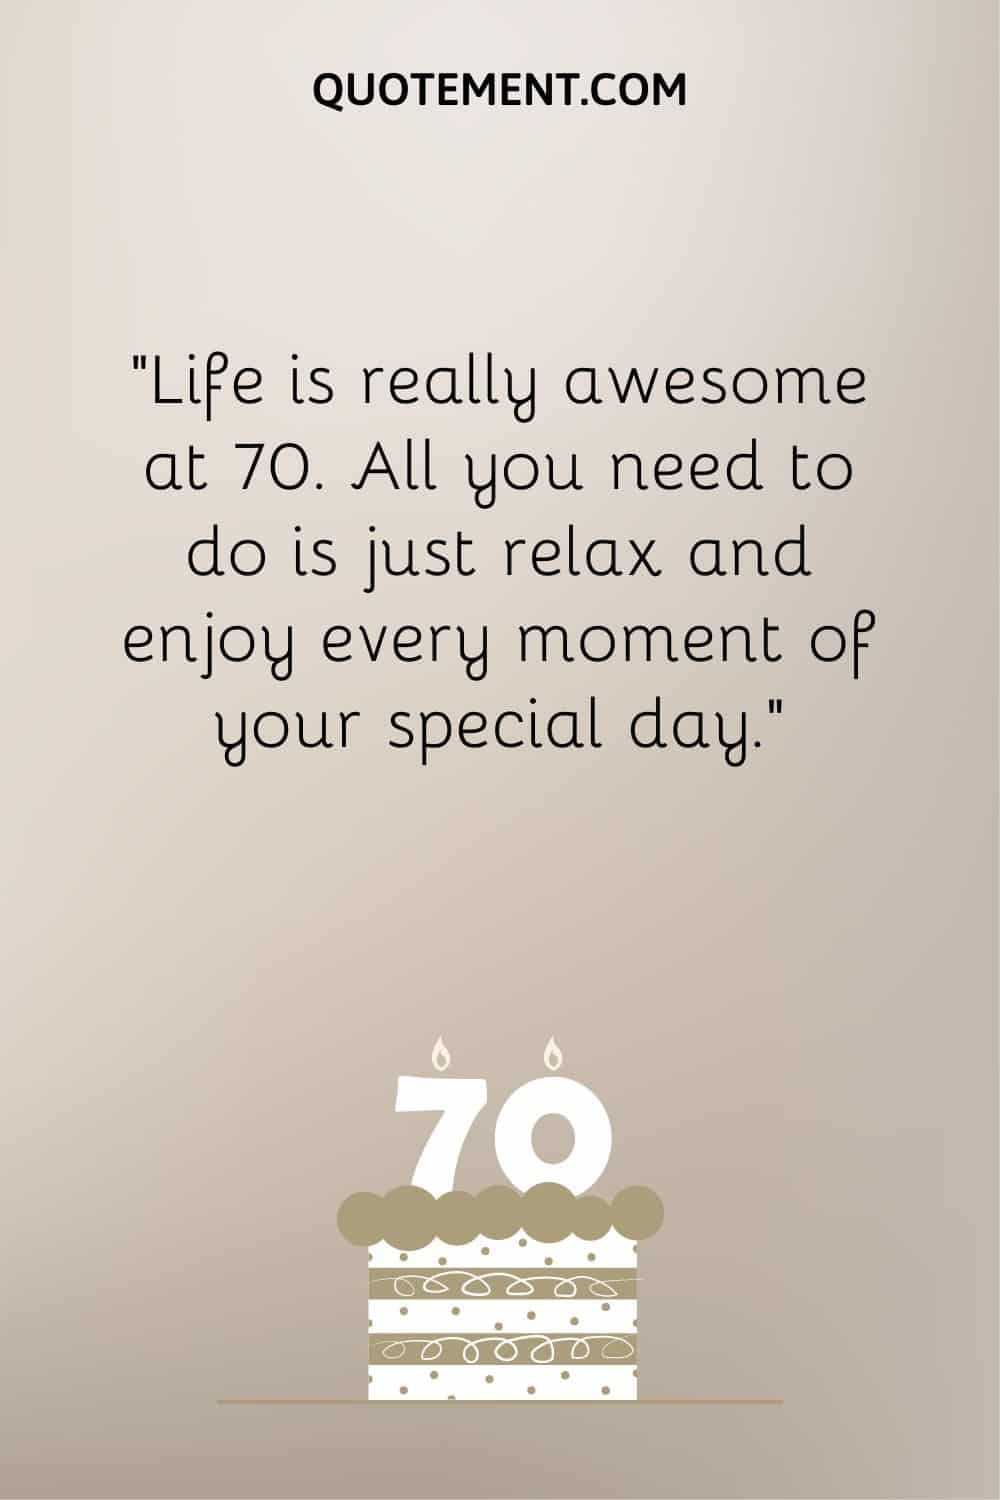 “Life is really awesome at 70. All you need to do is just relax and enjoy every moment of your special day.”
